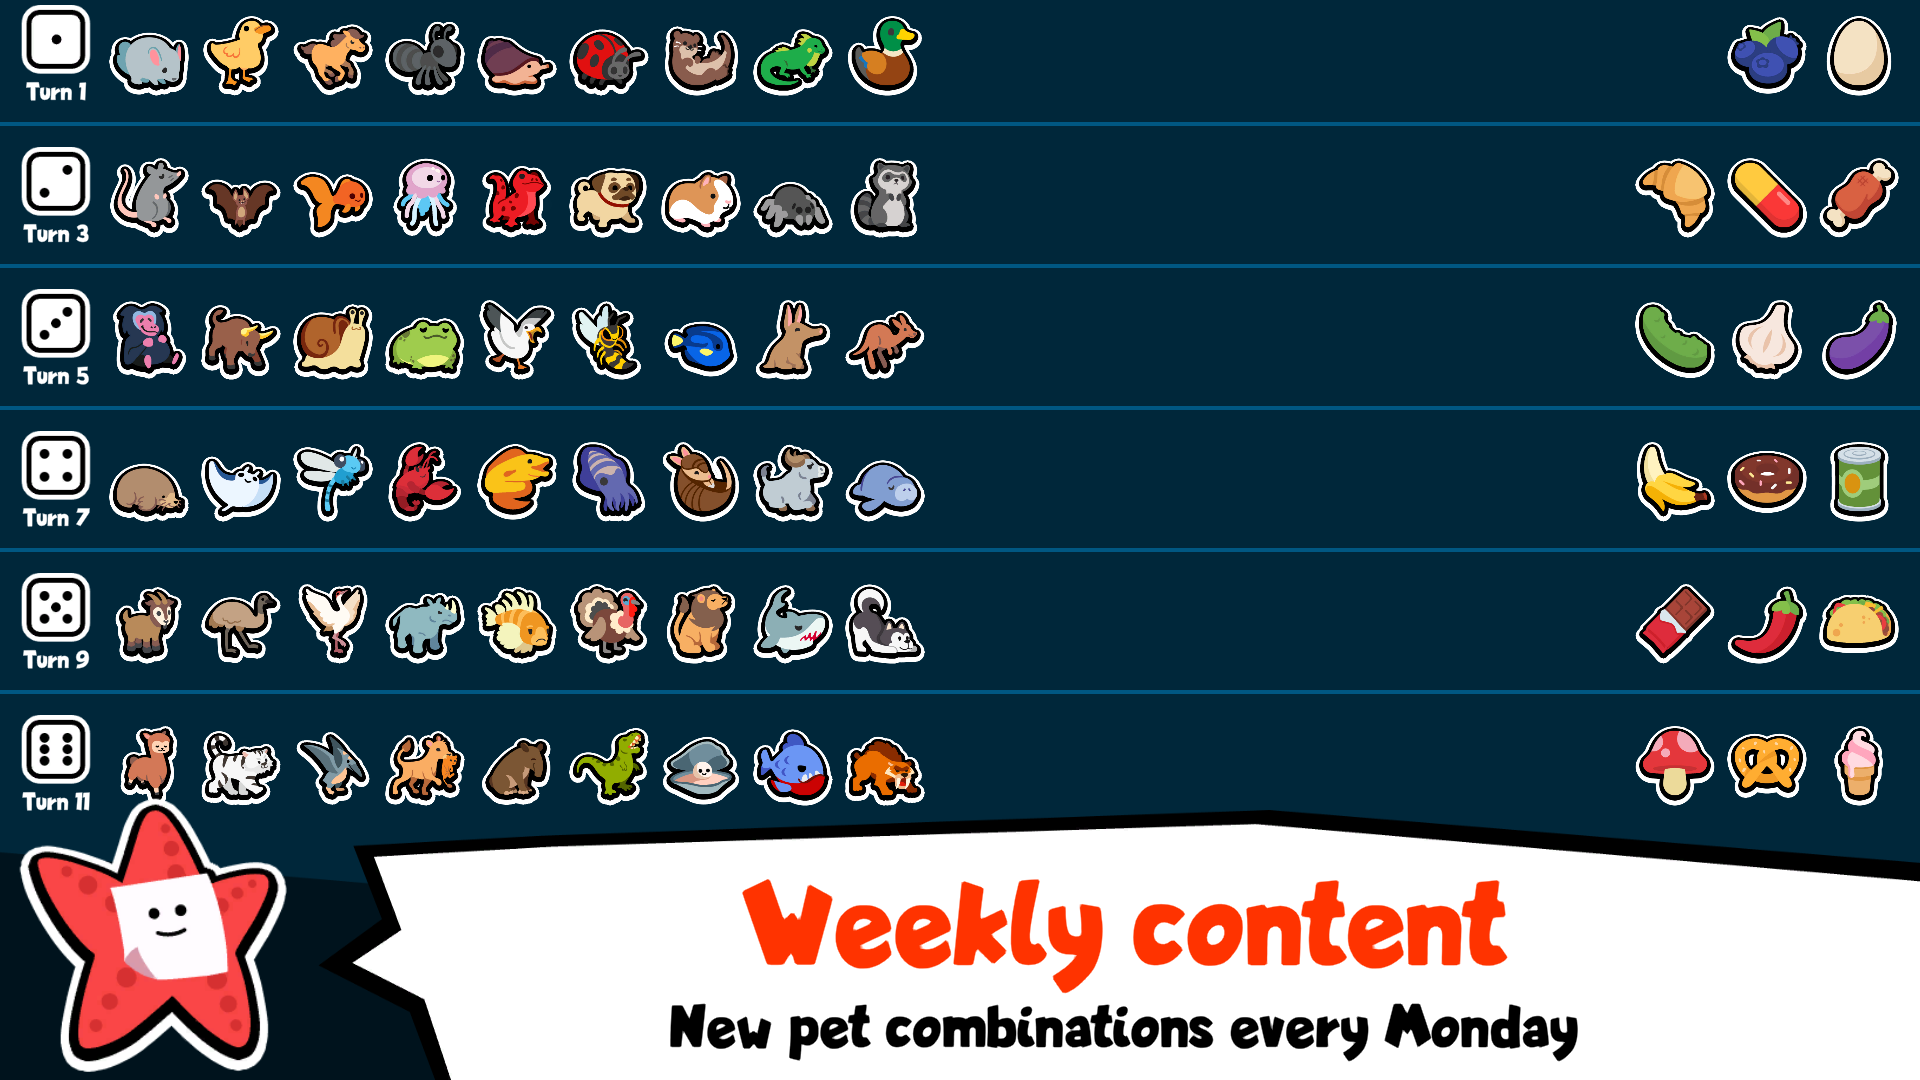 Weekly content - New pet combinations every Monday